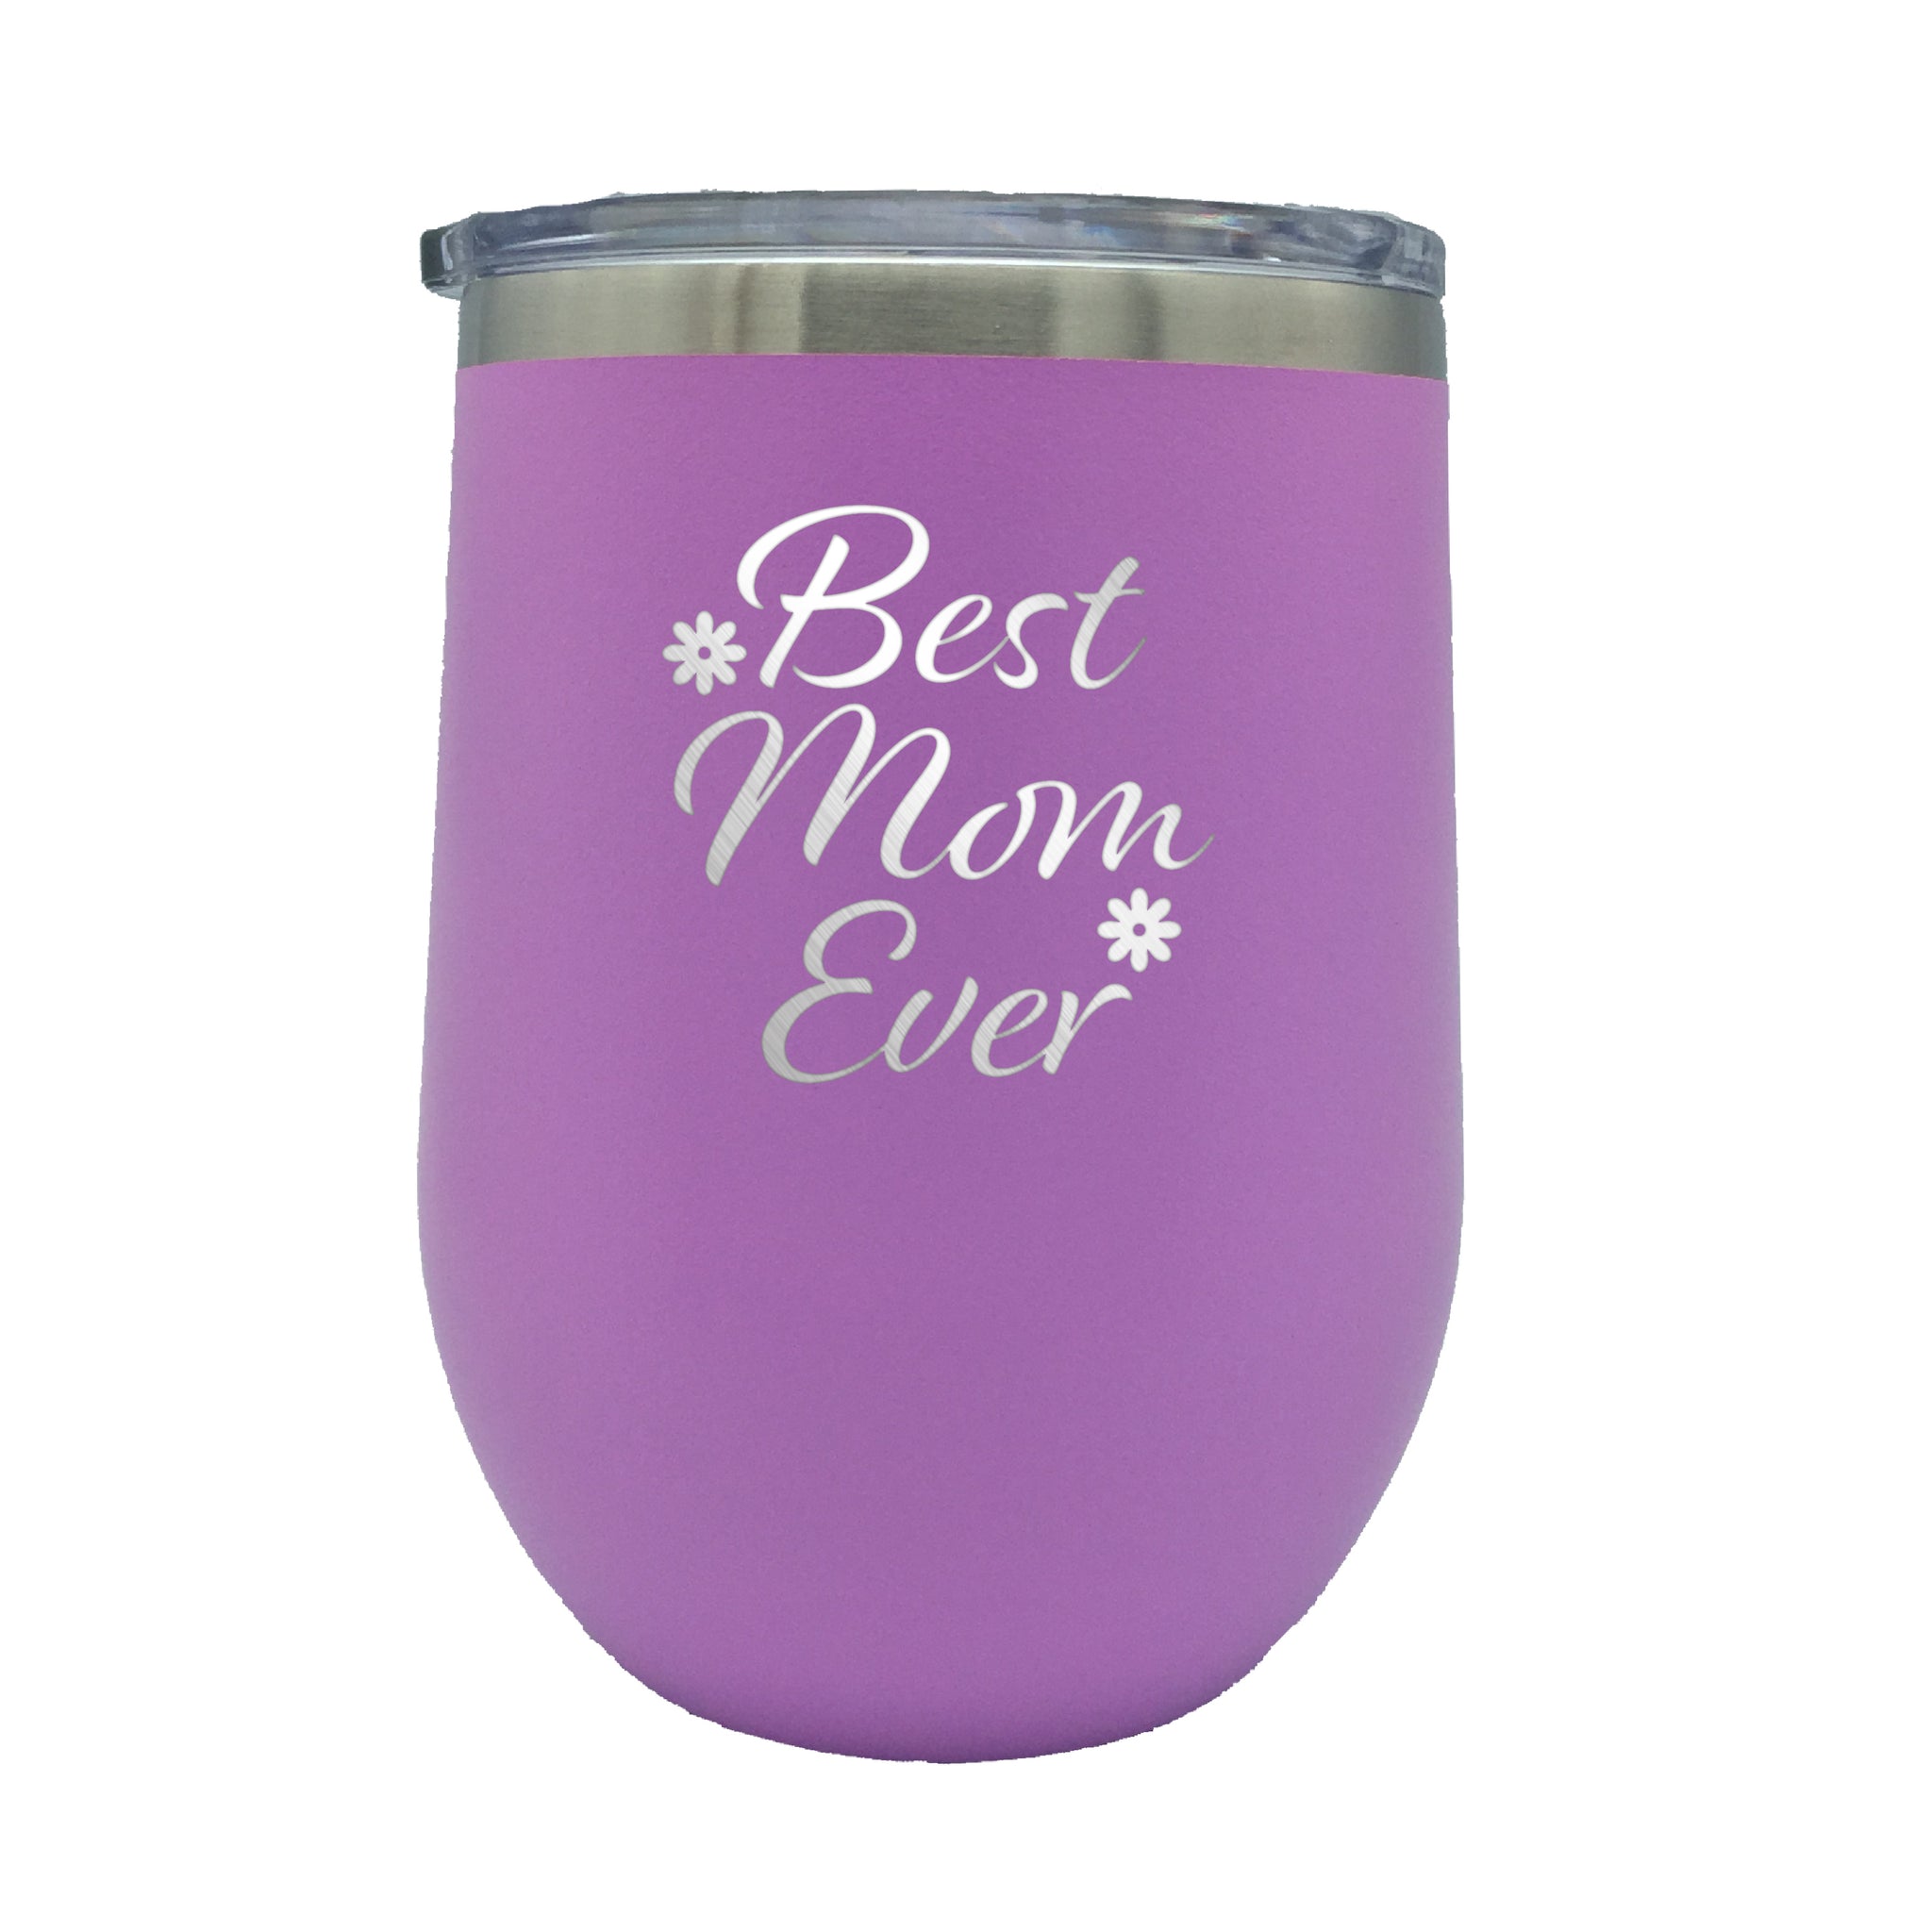 Best Mom Ever Stainless Steel Wine Tumbler - ETCHED IN USA - Perfect Companion for Camping or Outdoor Wine Drinking